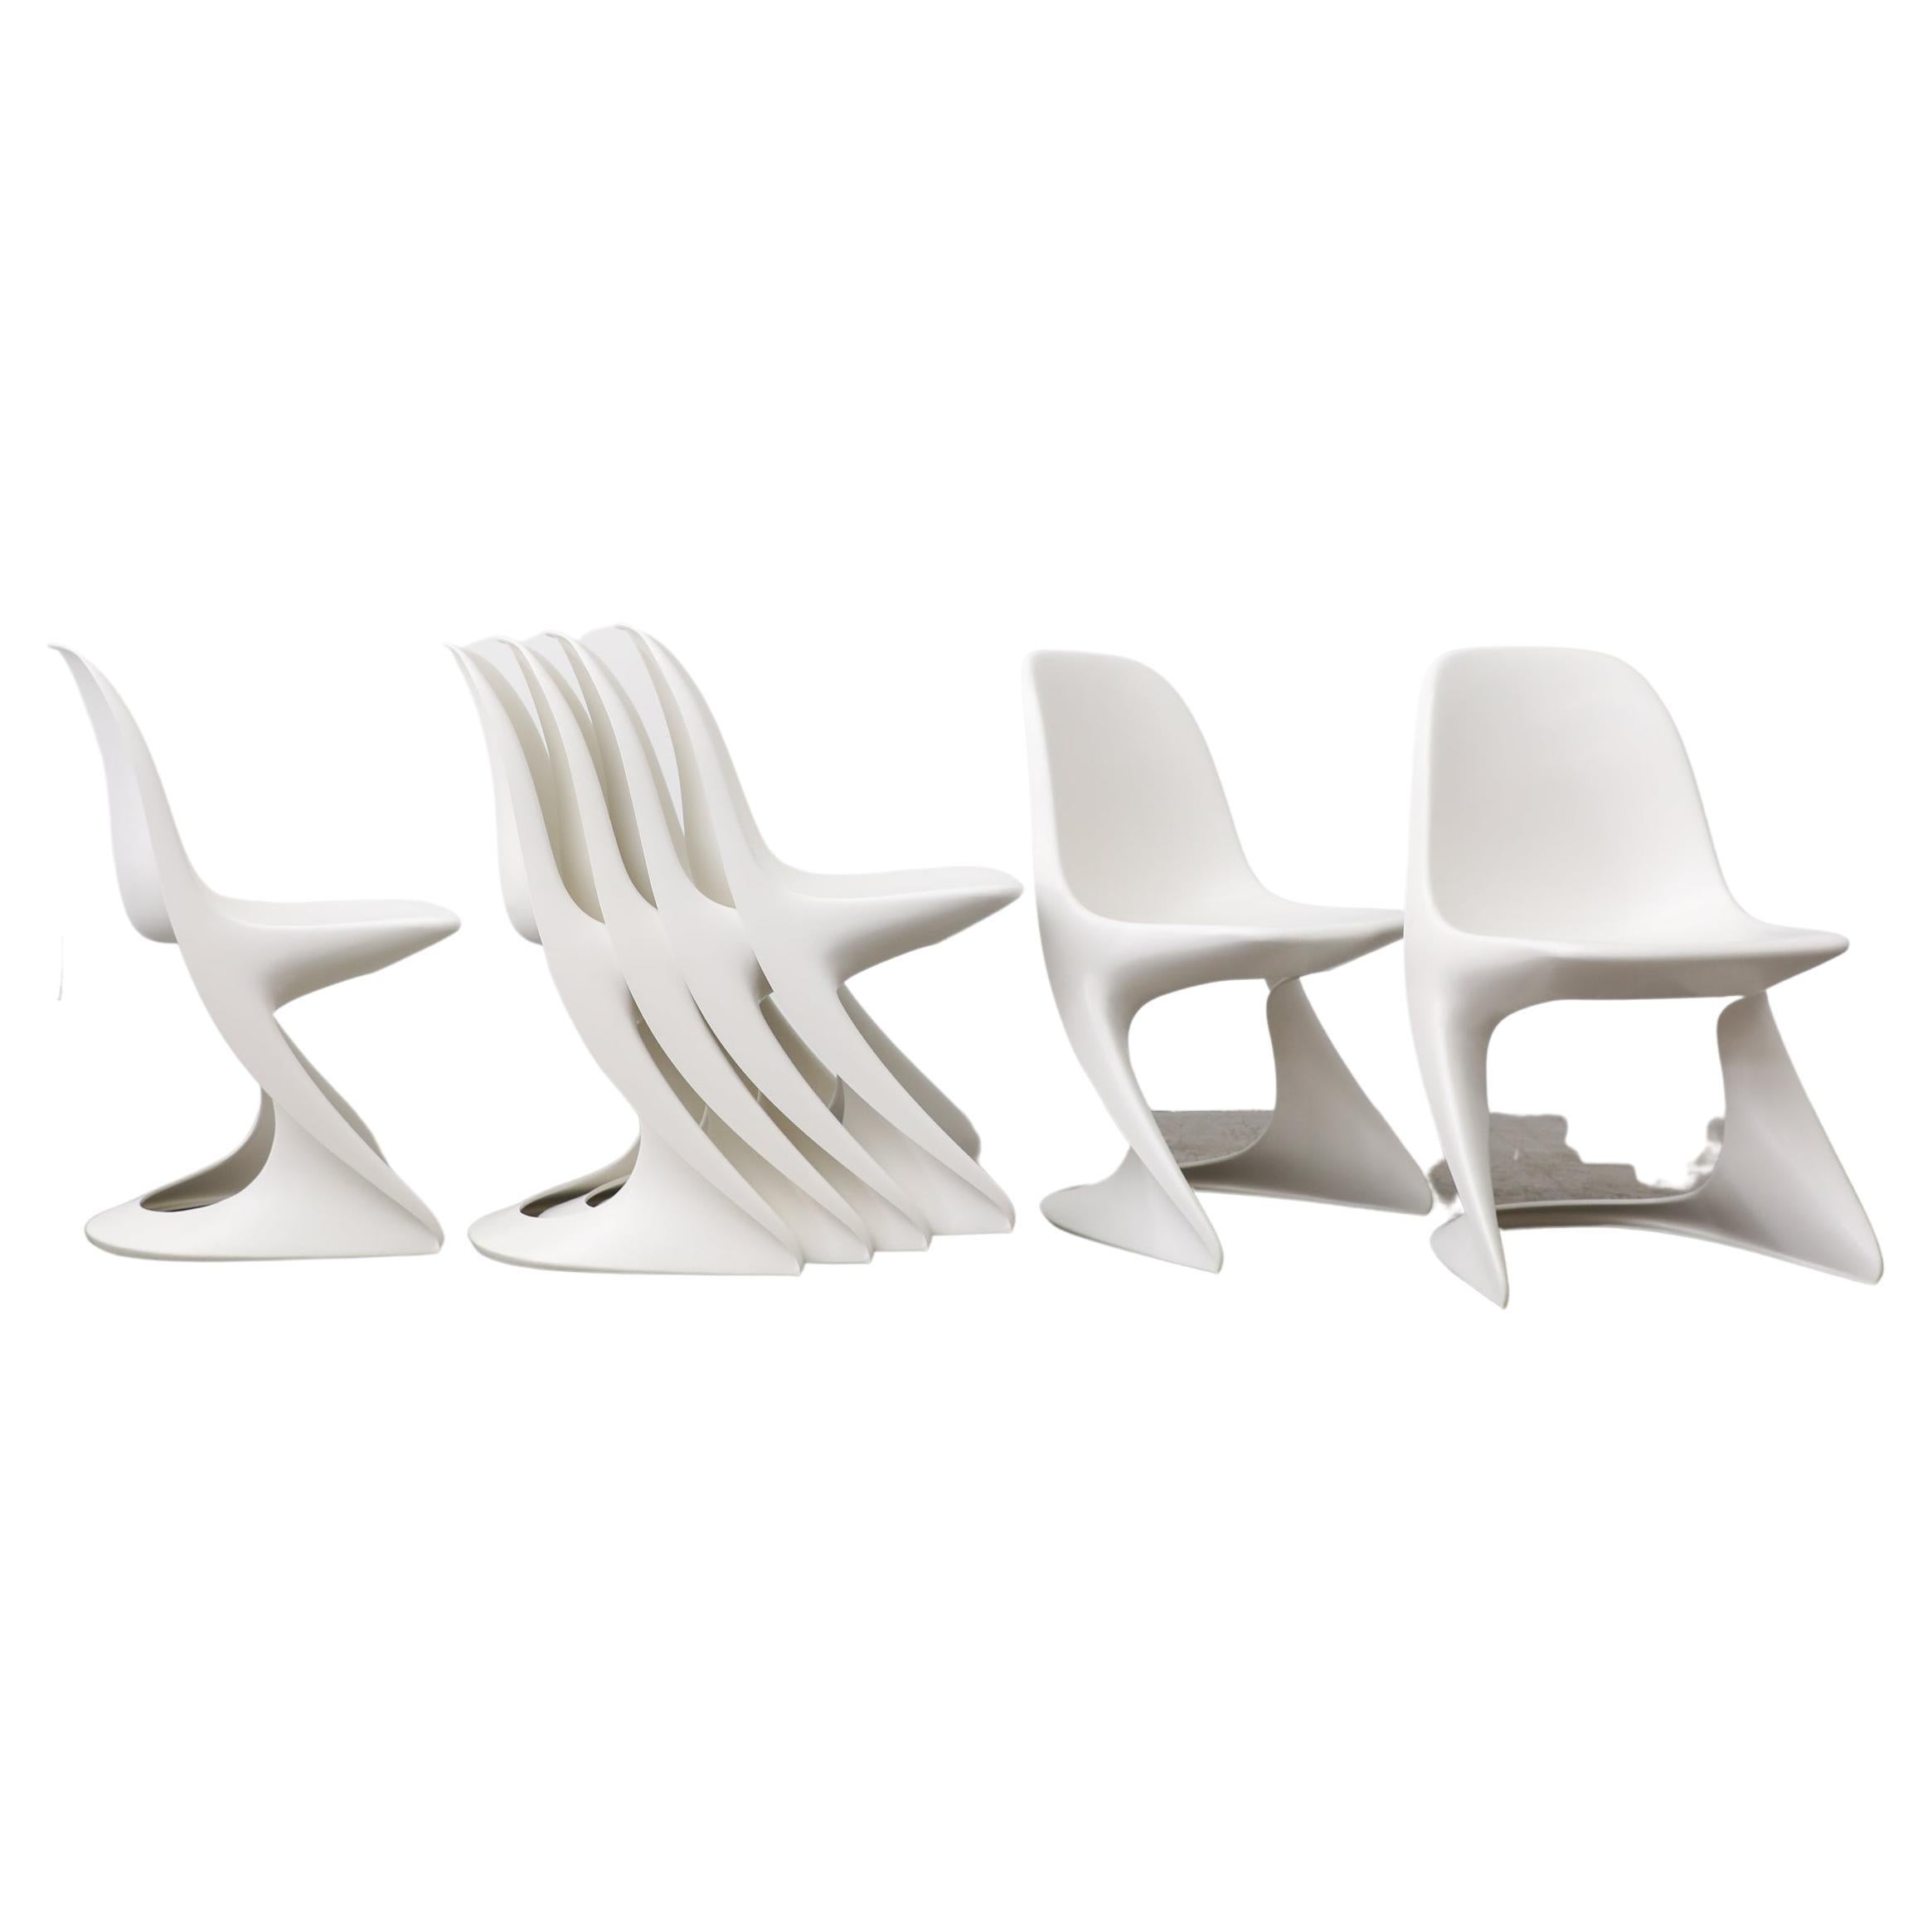 Set of six 1970's white plastic stacking Casalino chairs by Alexander Begge. In original condition with visible wear, including scratching. Two sets of 6 in white available, also available in red, green and black, listed separately (S056).